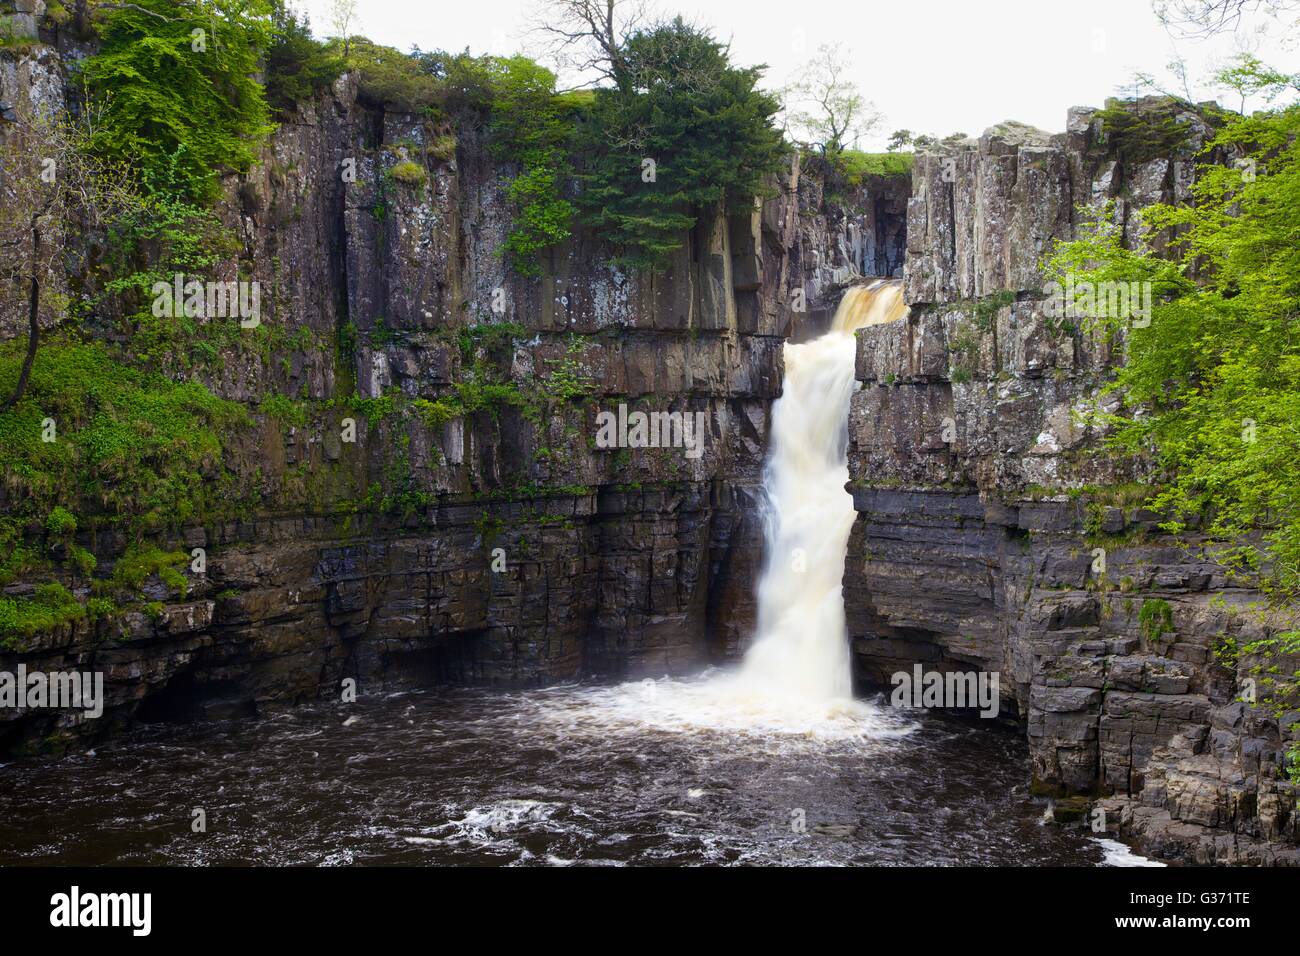 Hohe Kraft Wasserfall, River Tees, Wald-in-Teesdale, Durham Dales, Middleton-in-Teesdale, County Durham, England, UK. Stockfoto